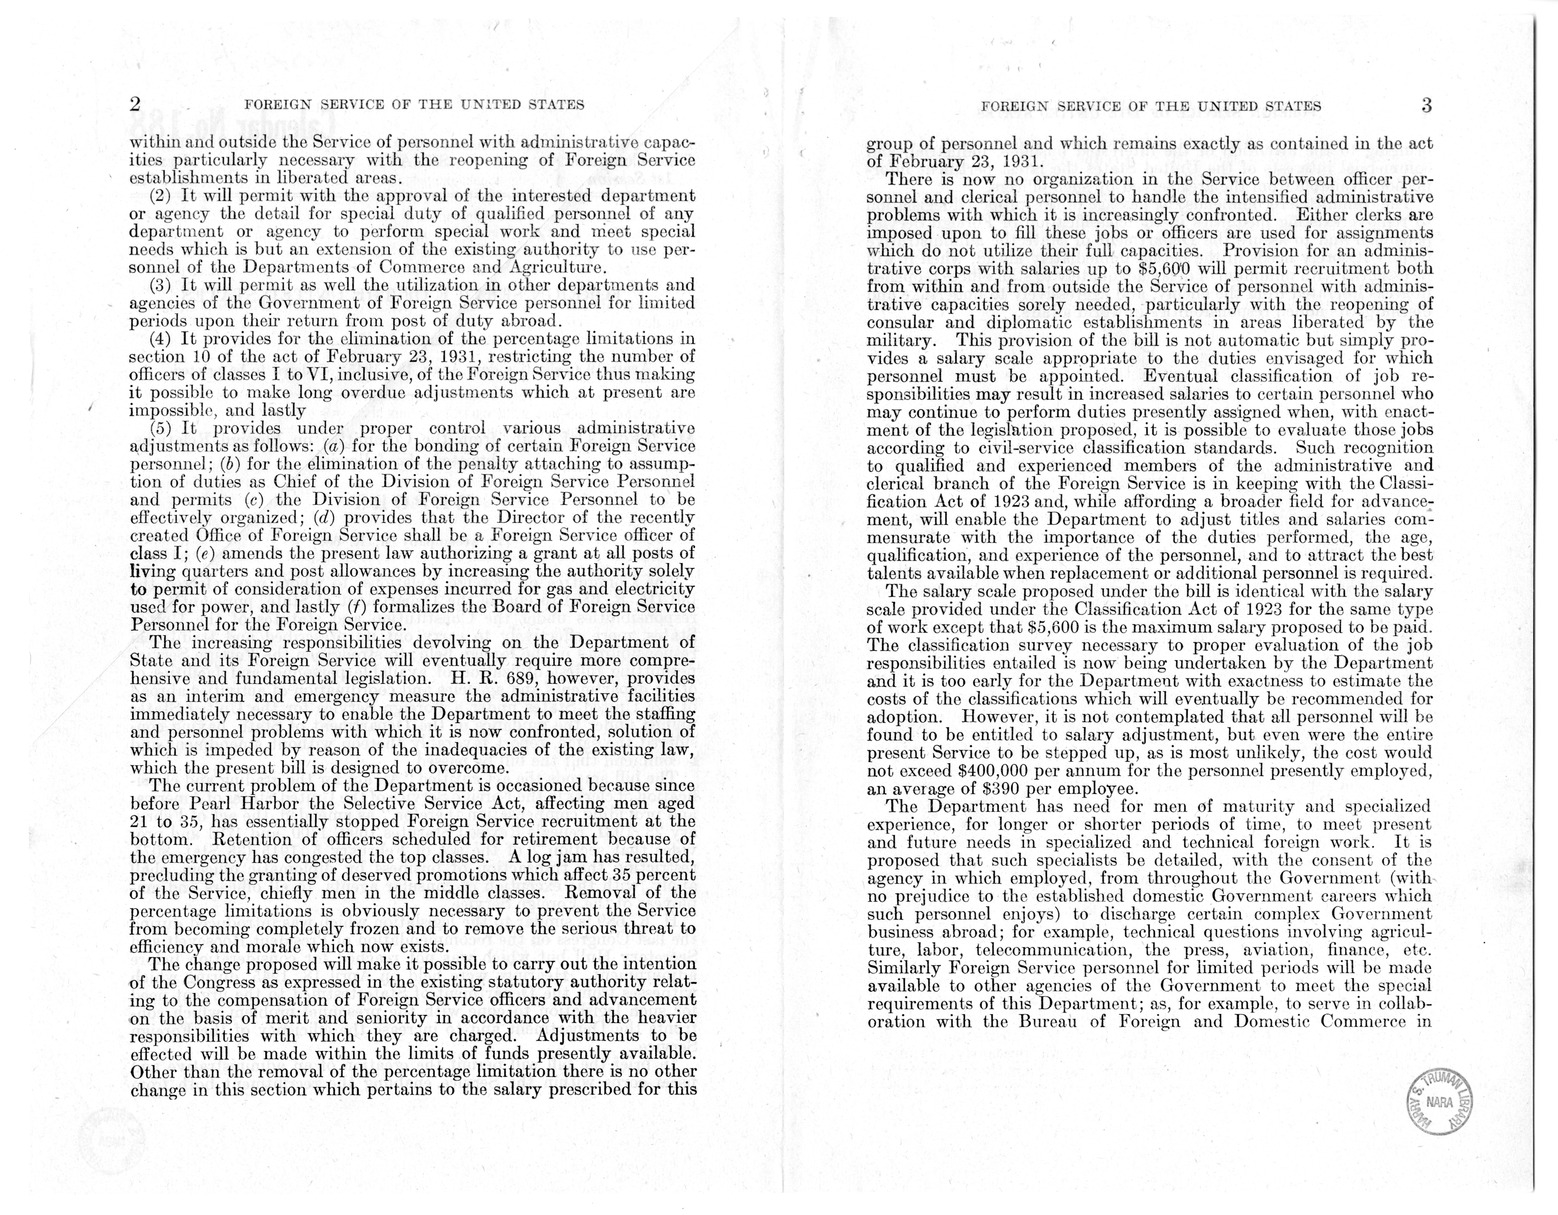 Memorandum from Harold D. Smith to M. C. Latta, H.R. 689, Regarding the Department of State and the Foreign Service, with Attachments